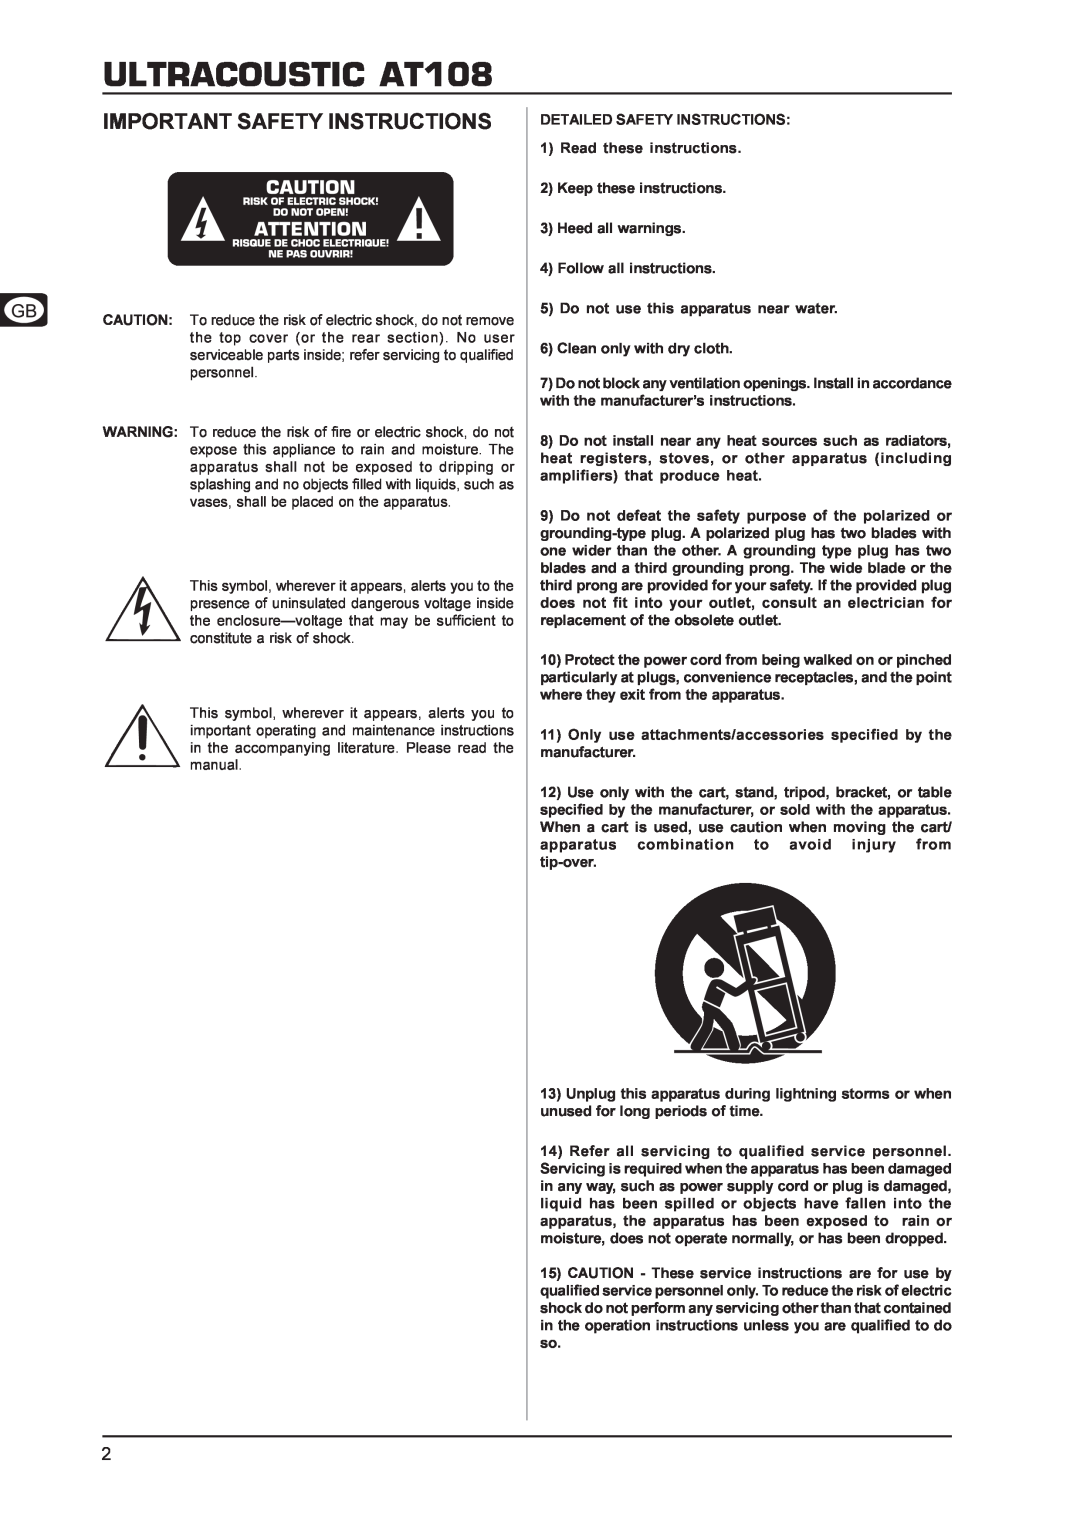 Behringer manual ULTRACOUSTIC AT108, Important Safety Instructions 